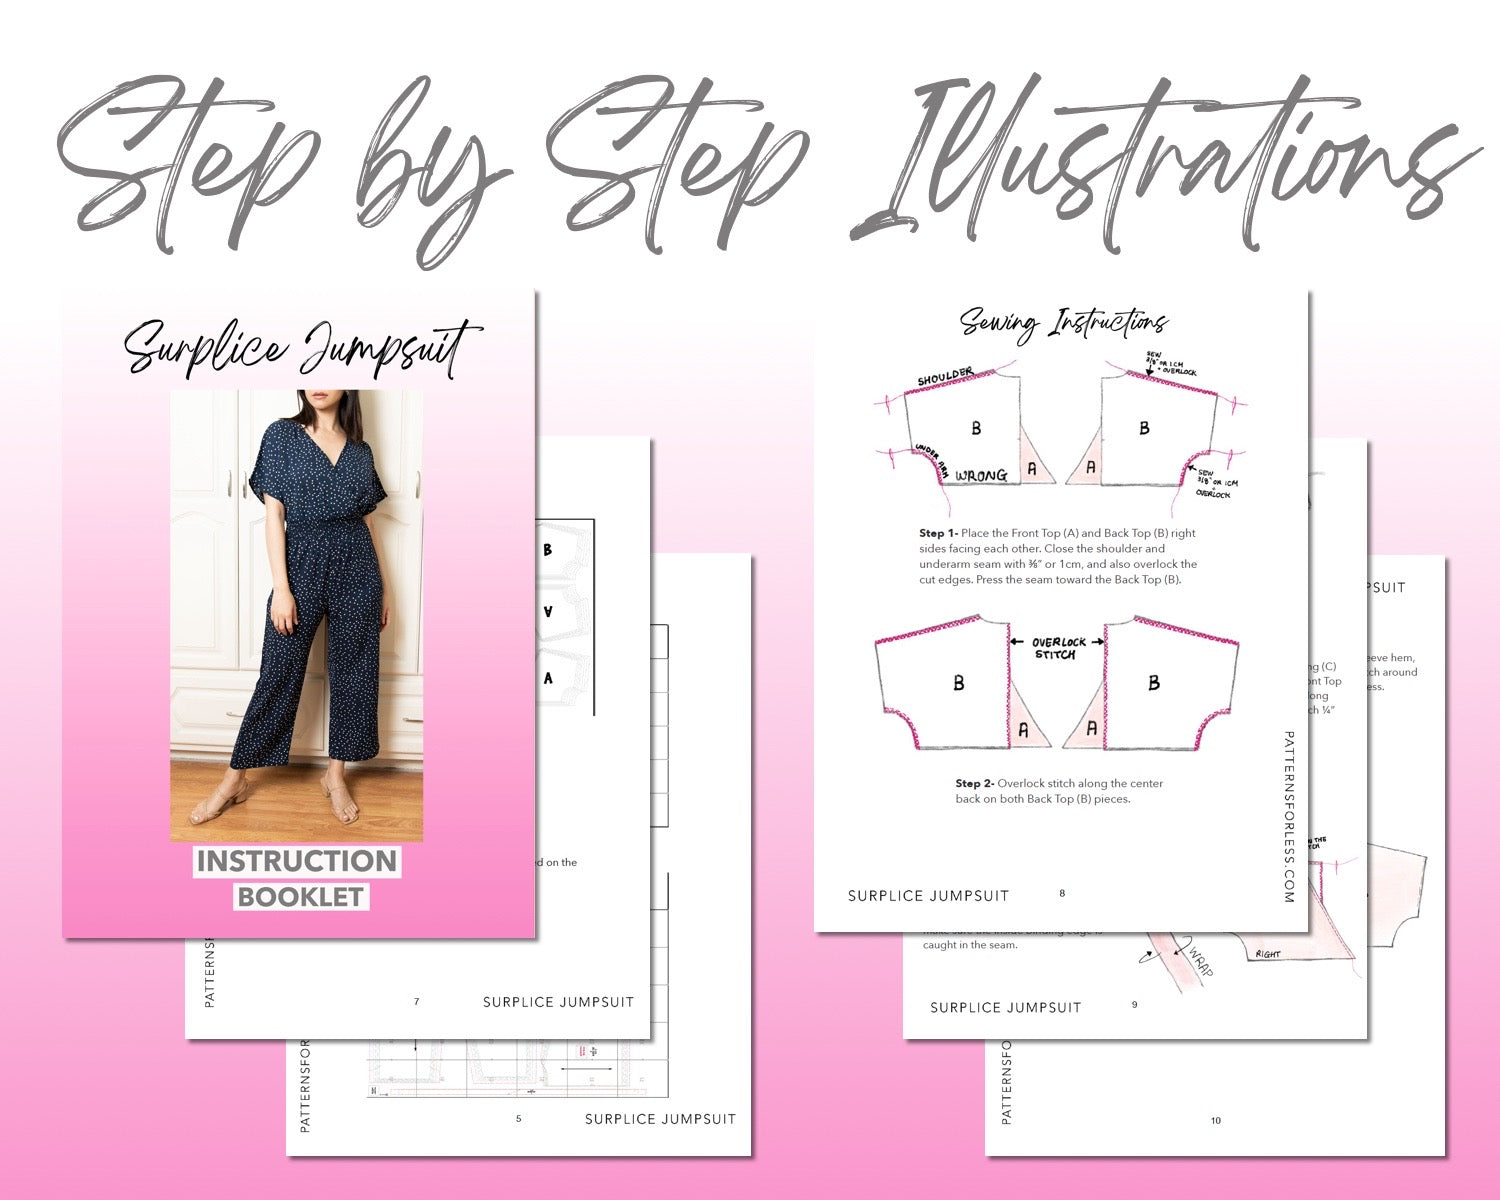 Surplice Jumpsuit sewing pattern step by step illustrations.